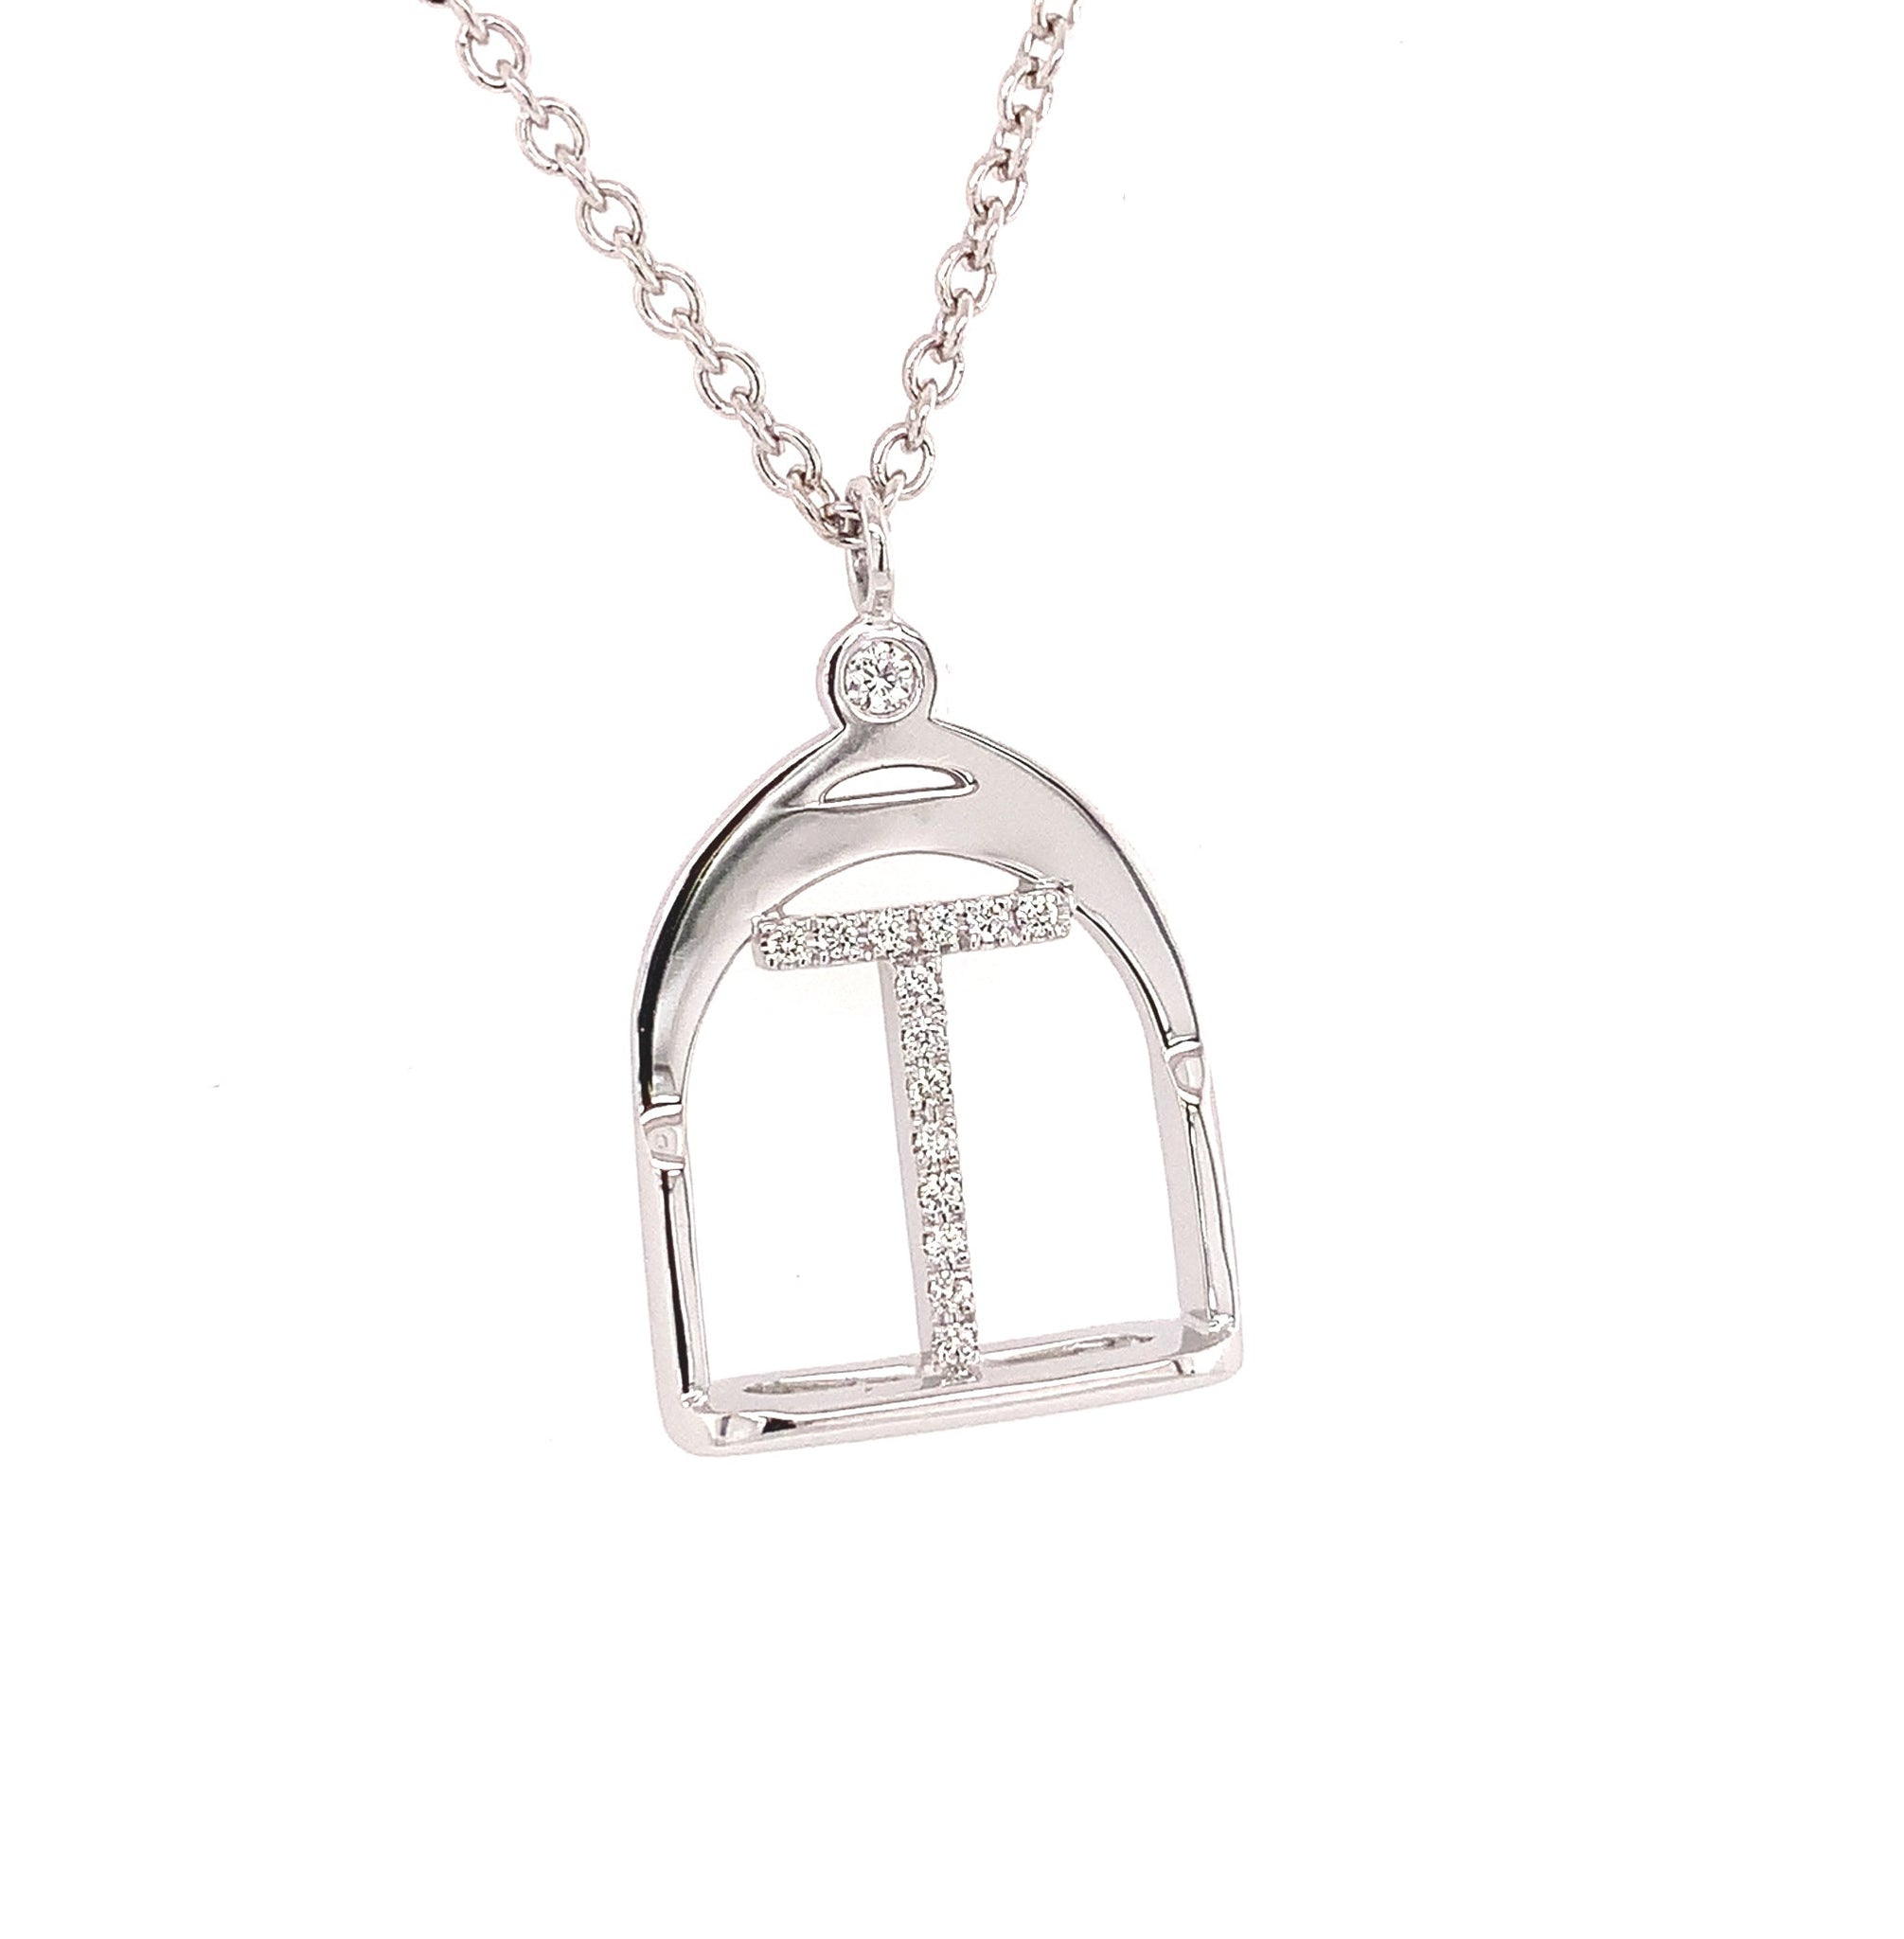 Small Stirrups Initials Necklace